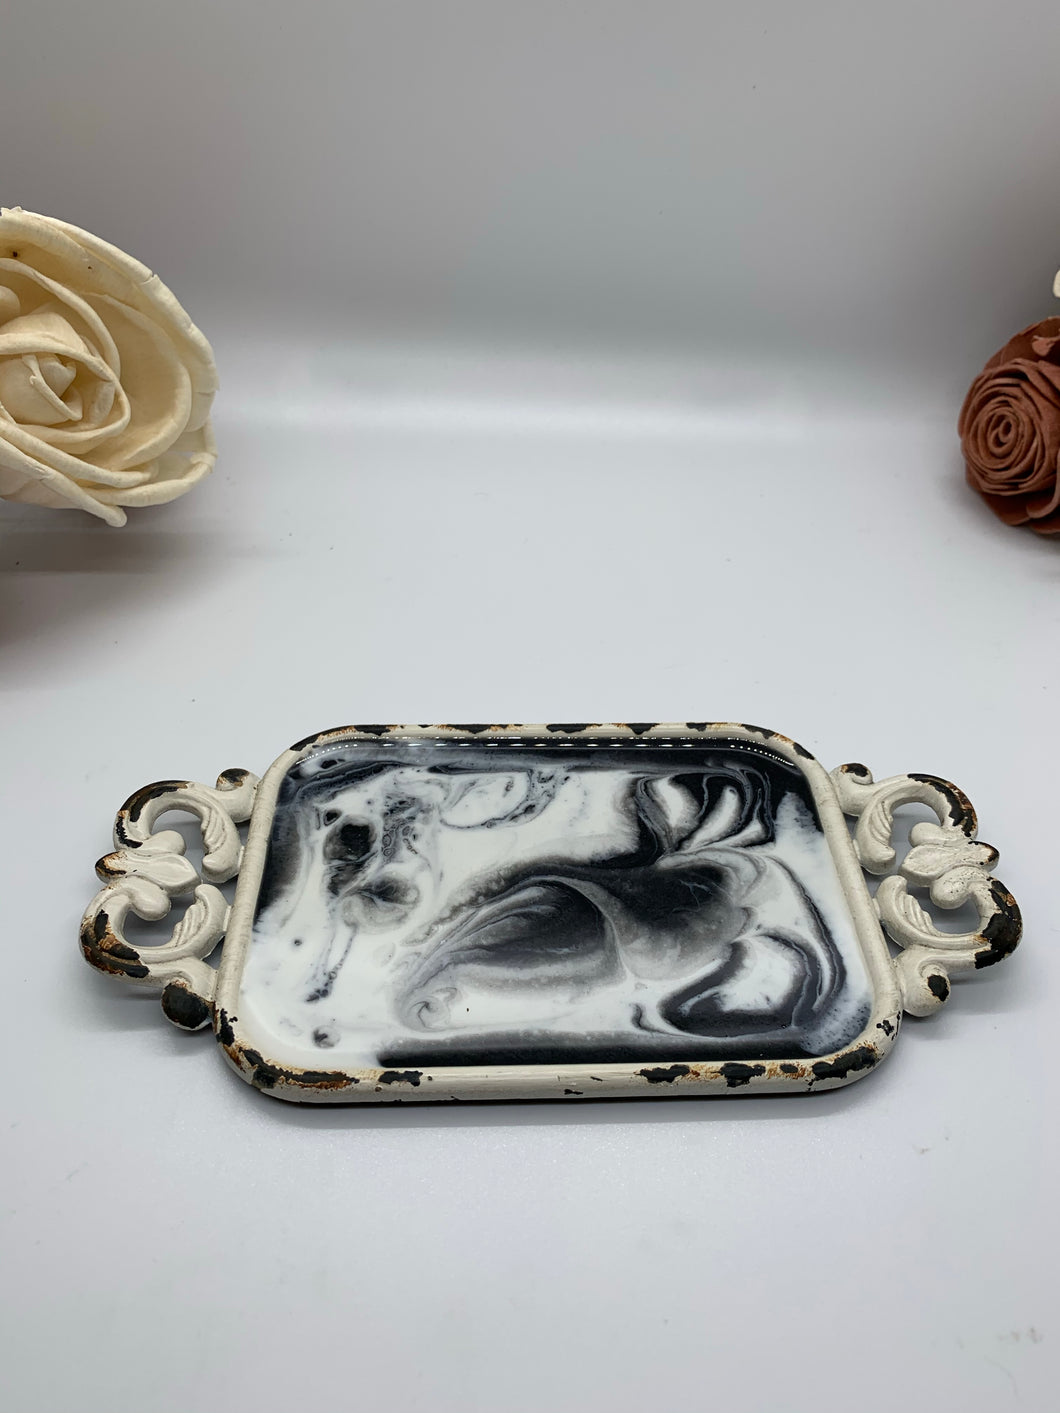 Handcrafted Vintage Jewelry Dishes